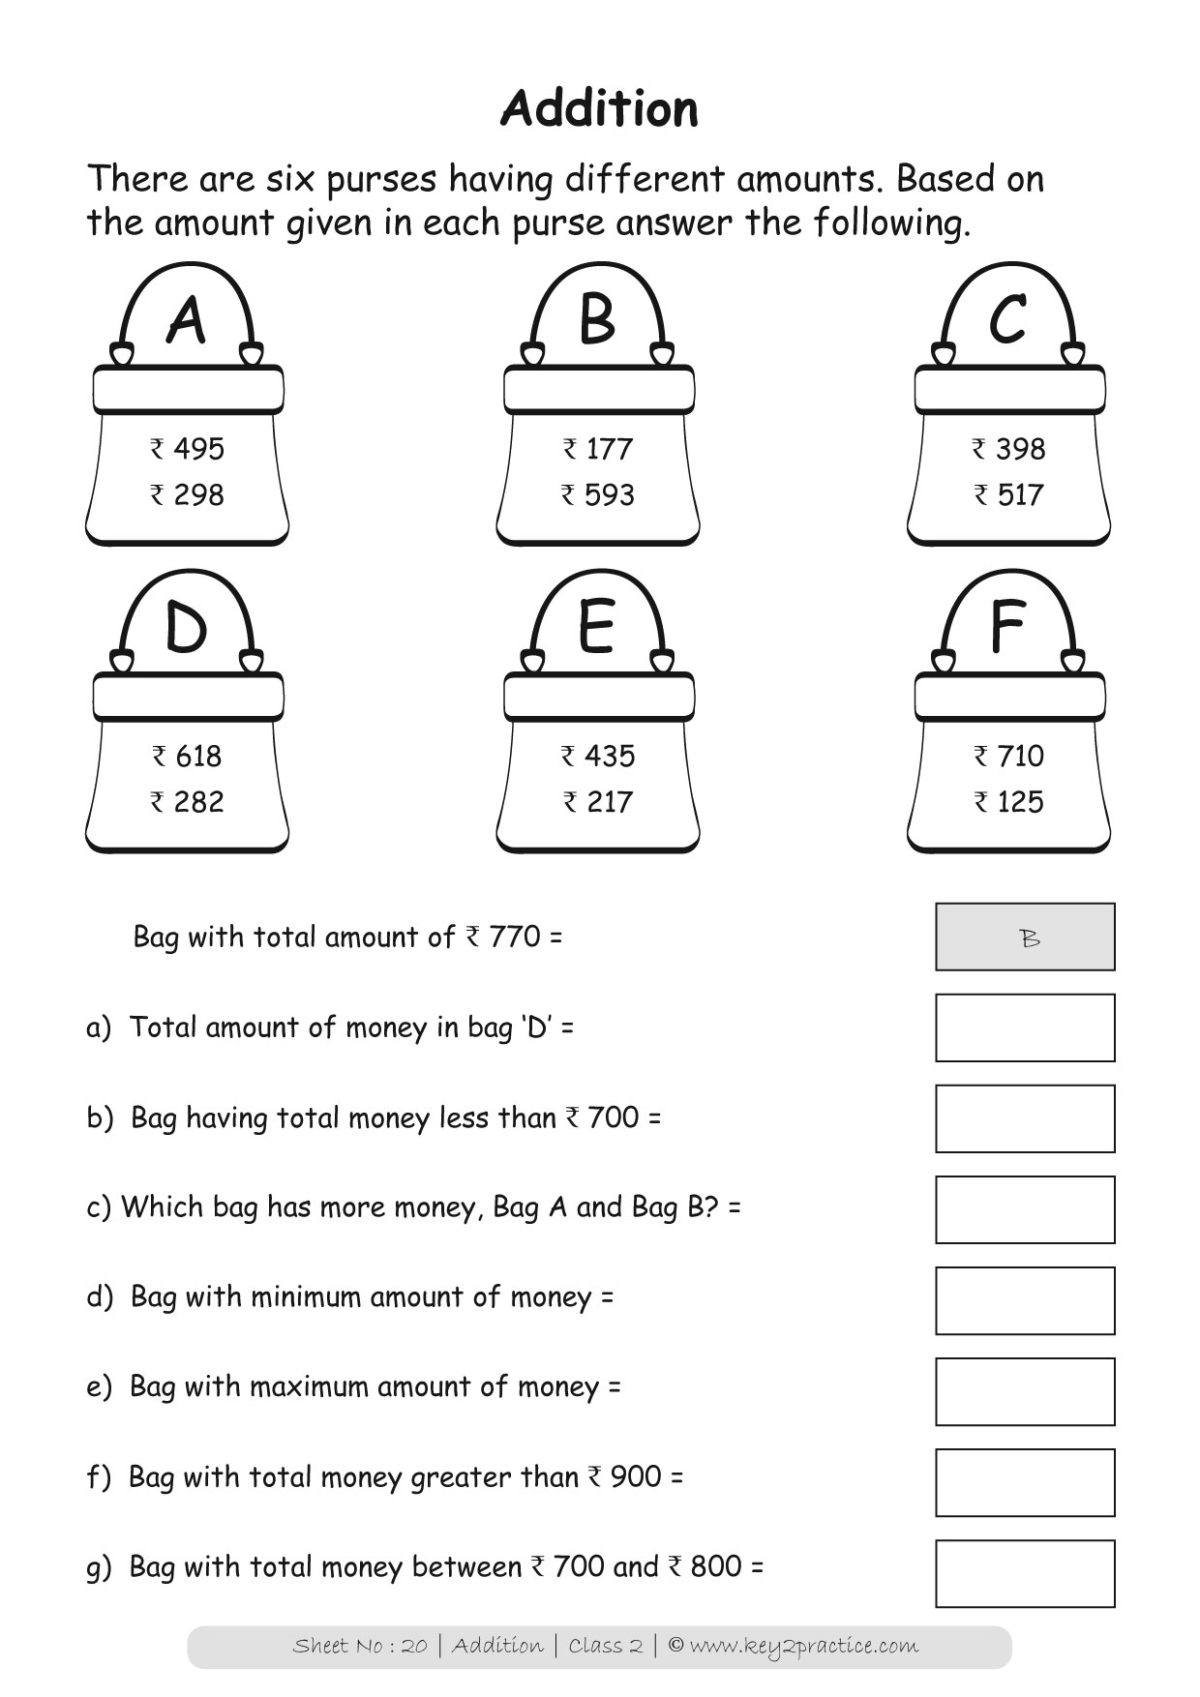 Addition Worksheet For Class 3 Pdf